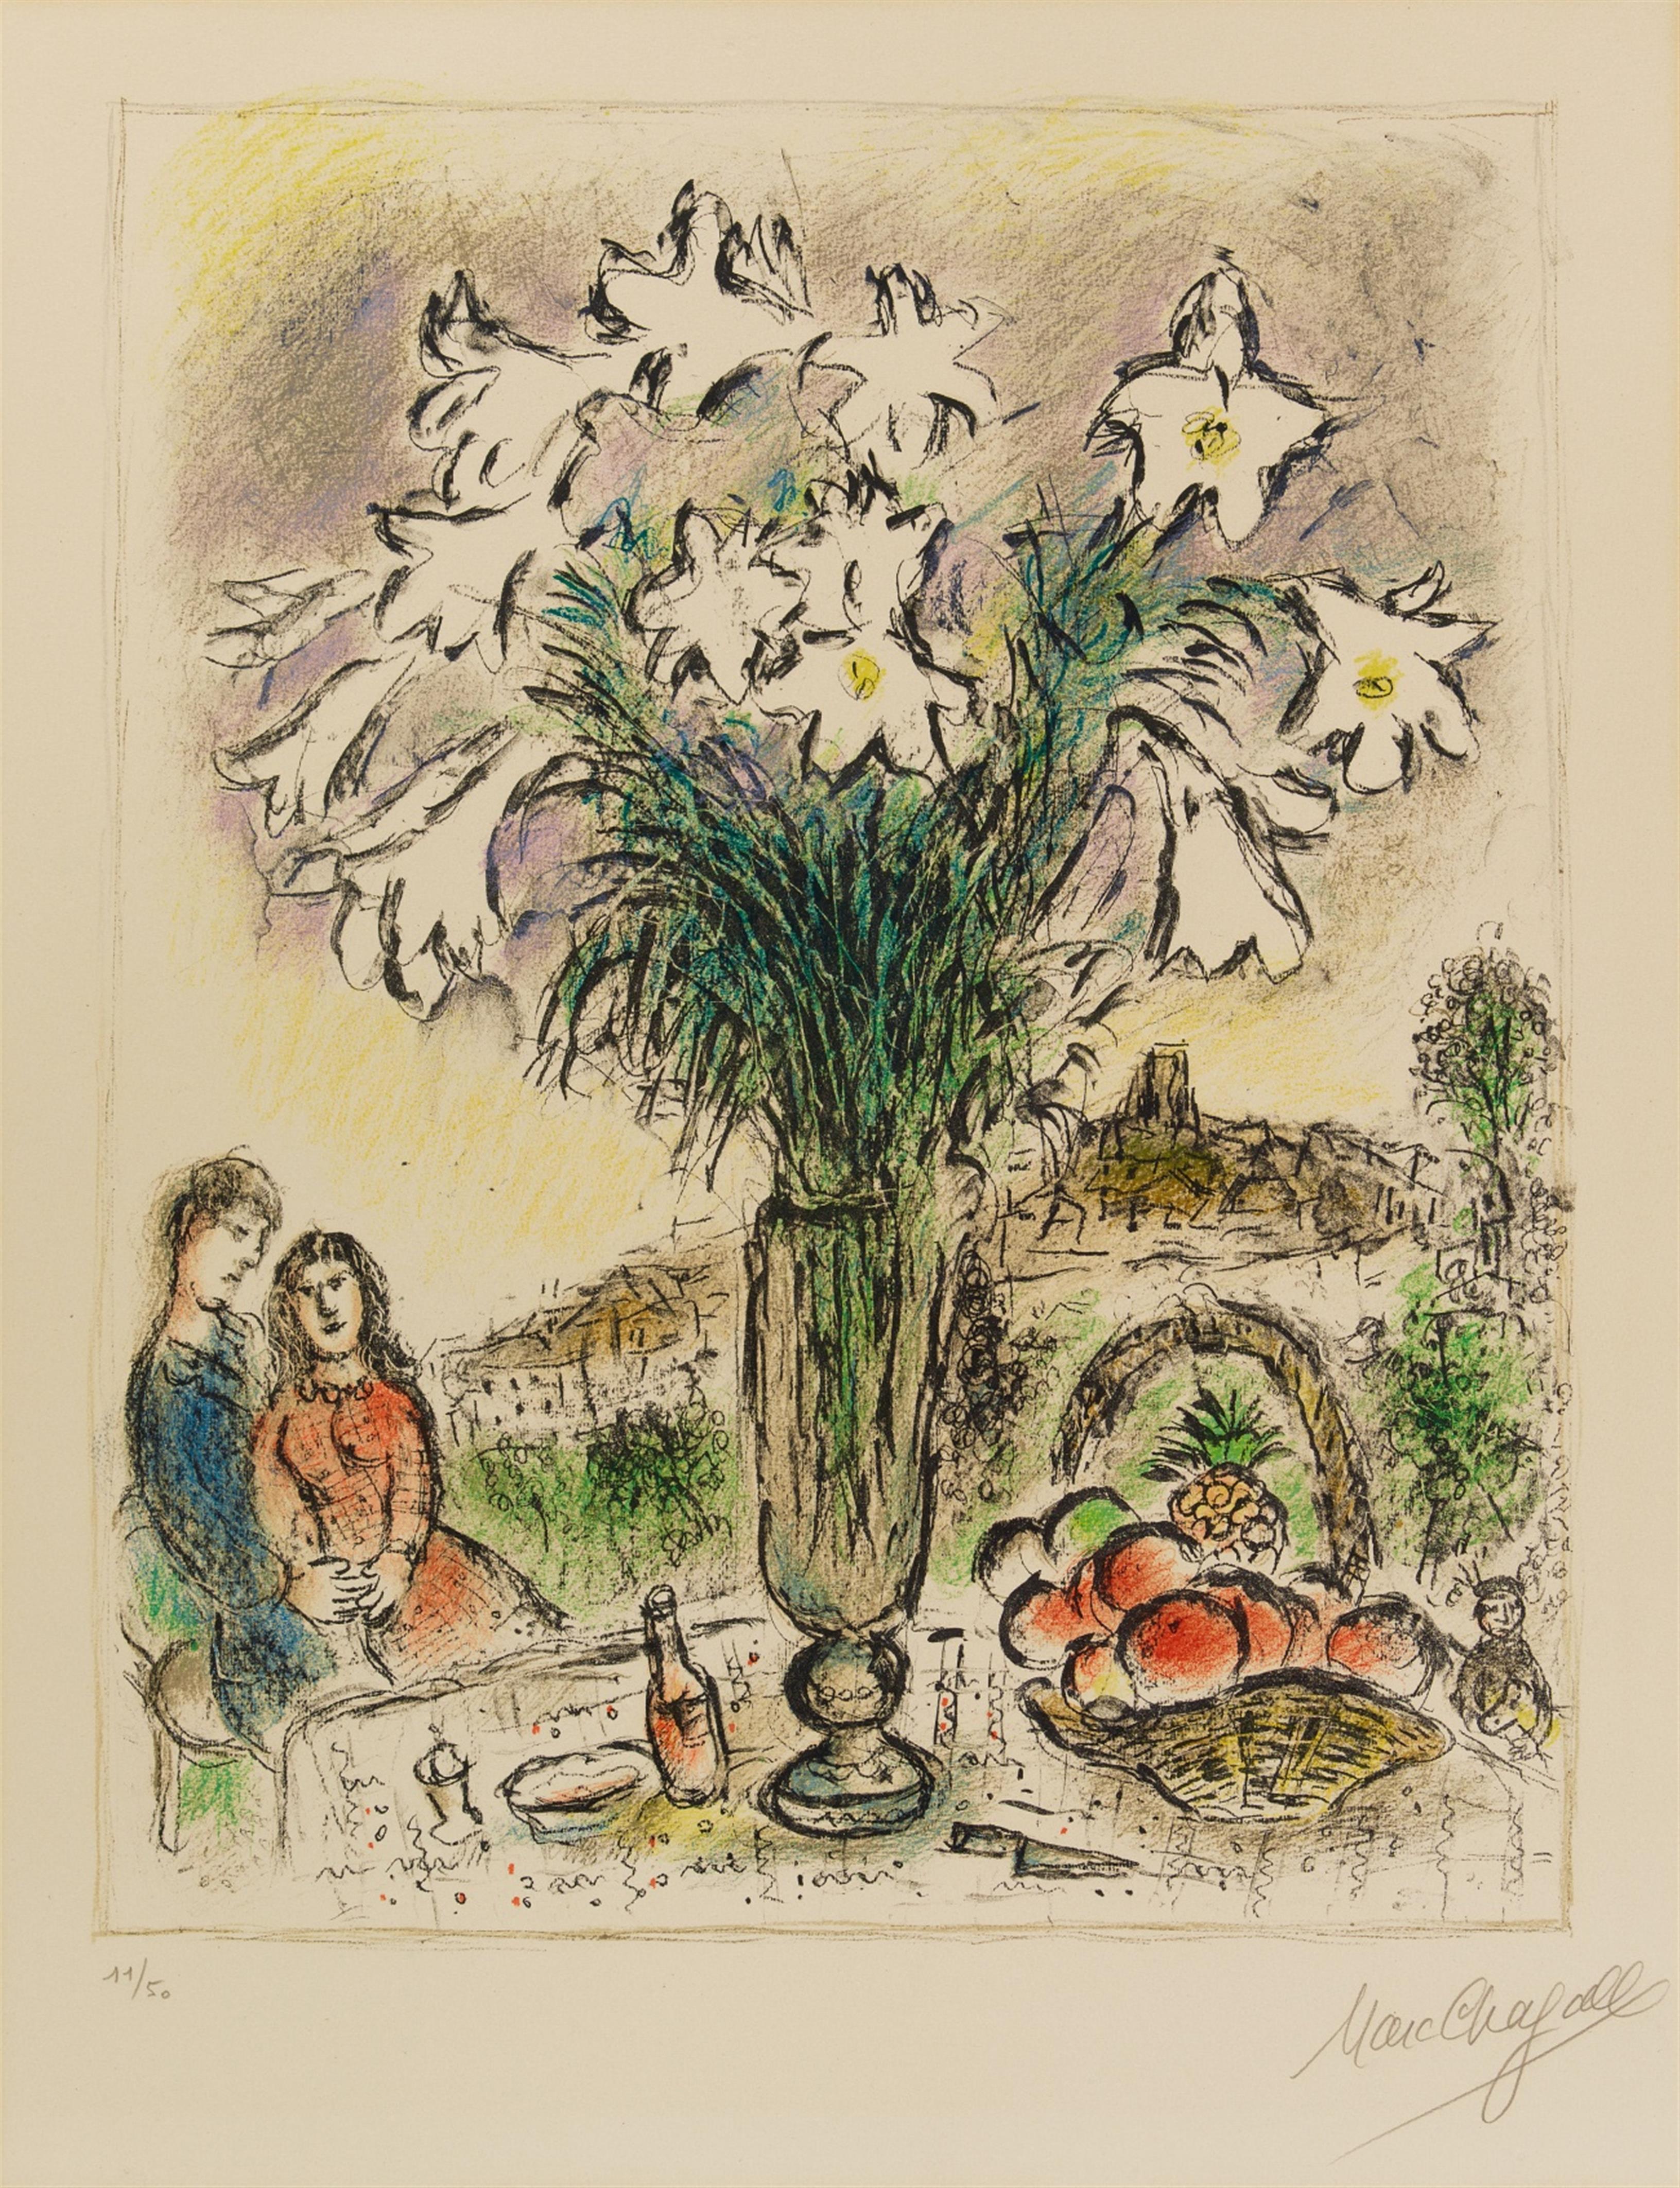 Marc Chagall - Les Arums (Aronswurz) - image-1